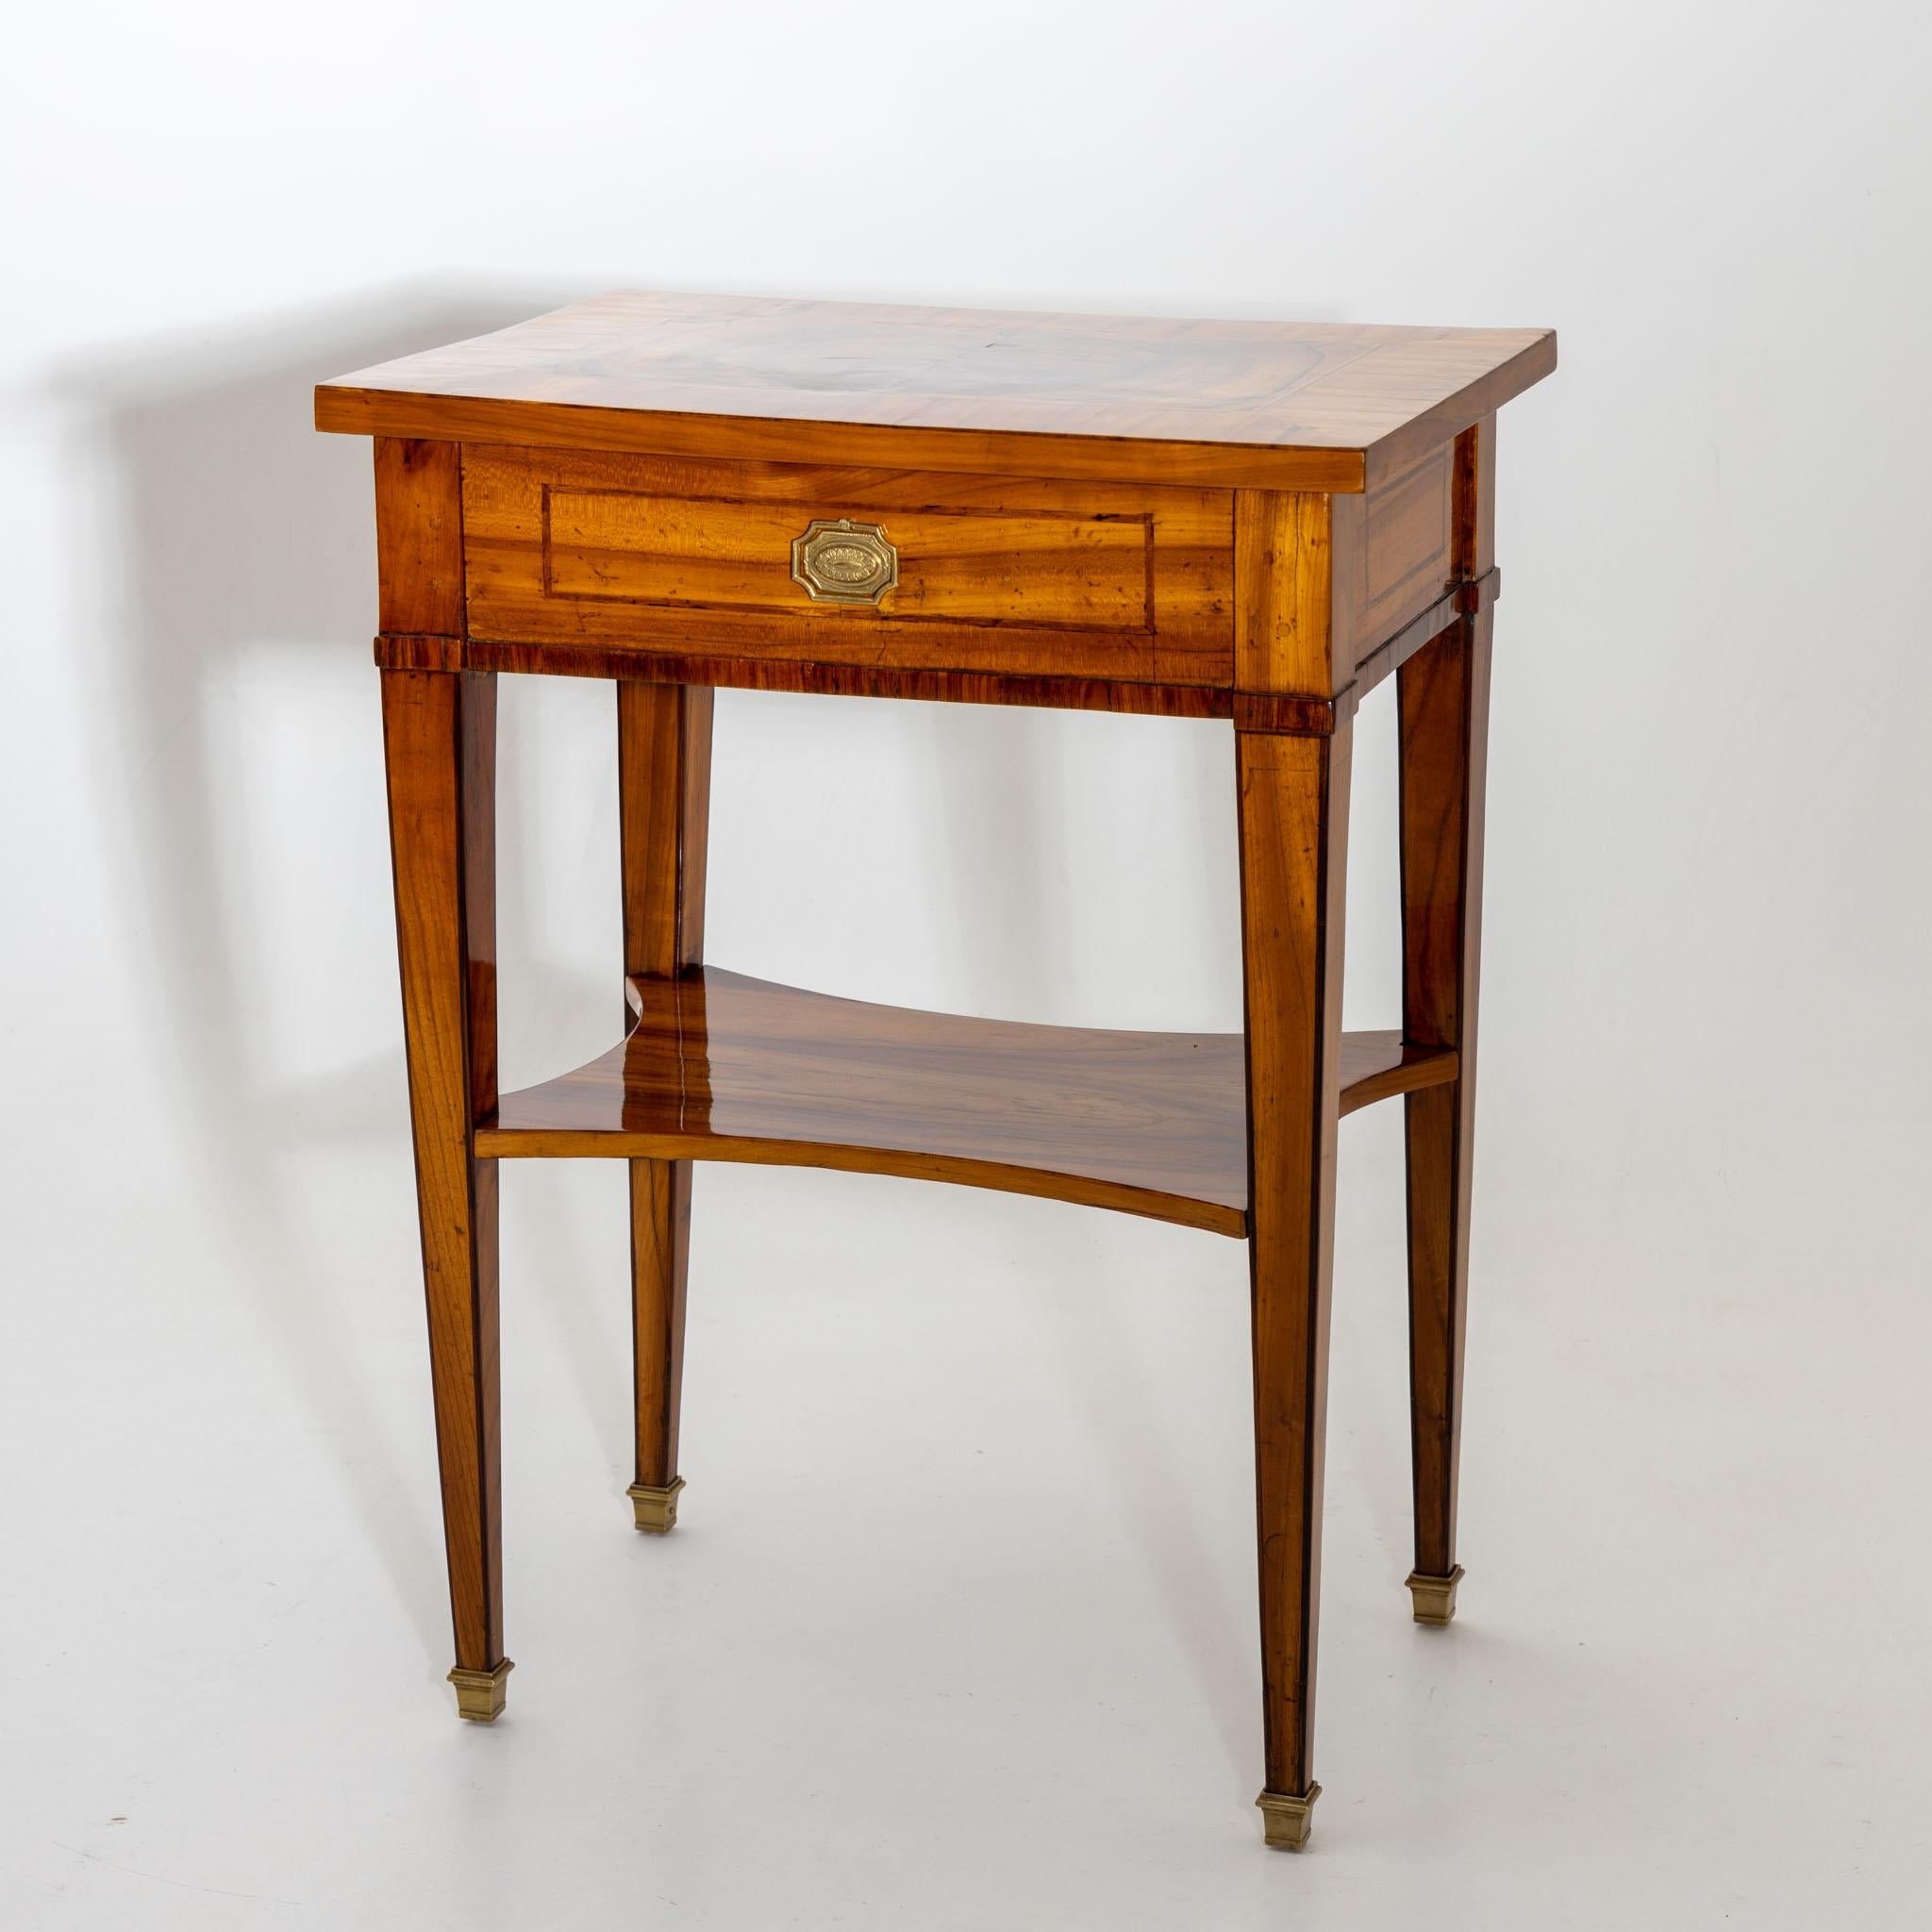 Small side table on high square pointed legs with brass sabots and a drawer including a clipboard. The drawer is divided into smaller compartments. The table is veneered in cherry and hand polished.